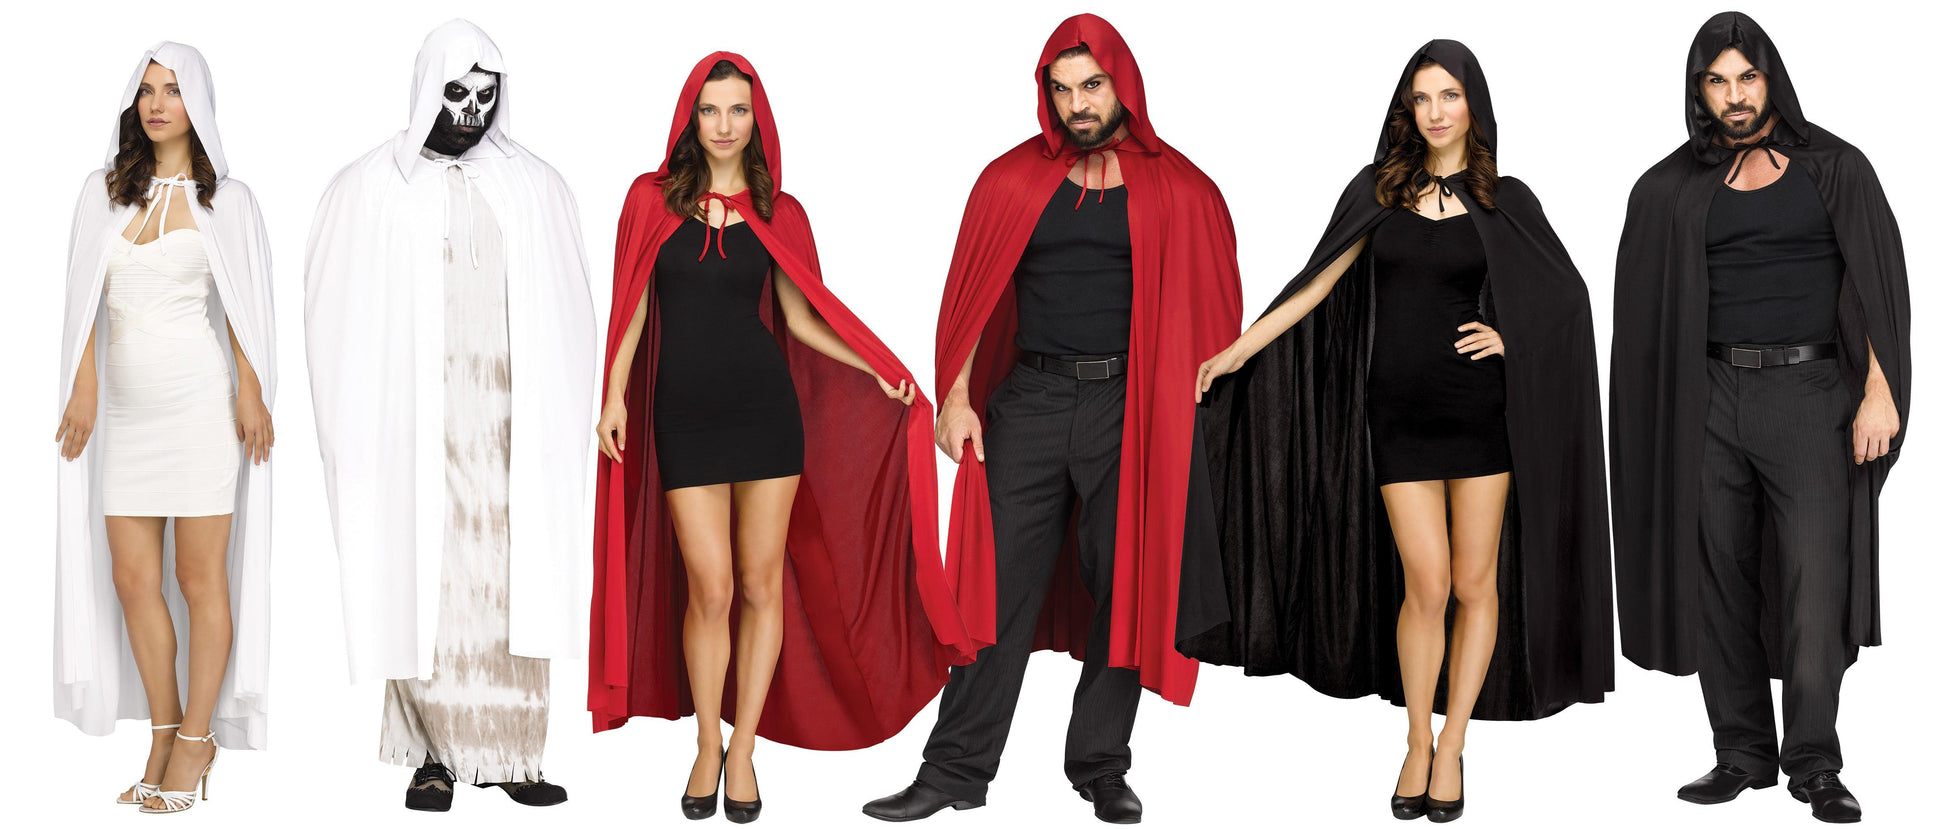 Adult 68" Hooded Cape - McCabe's Costumes